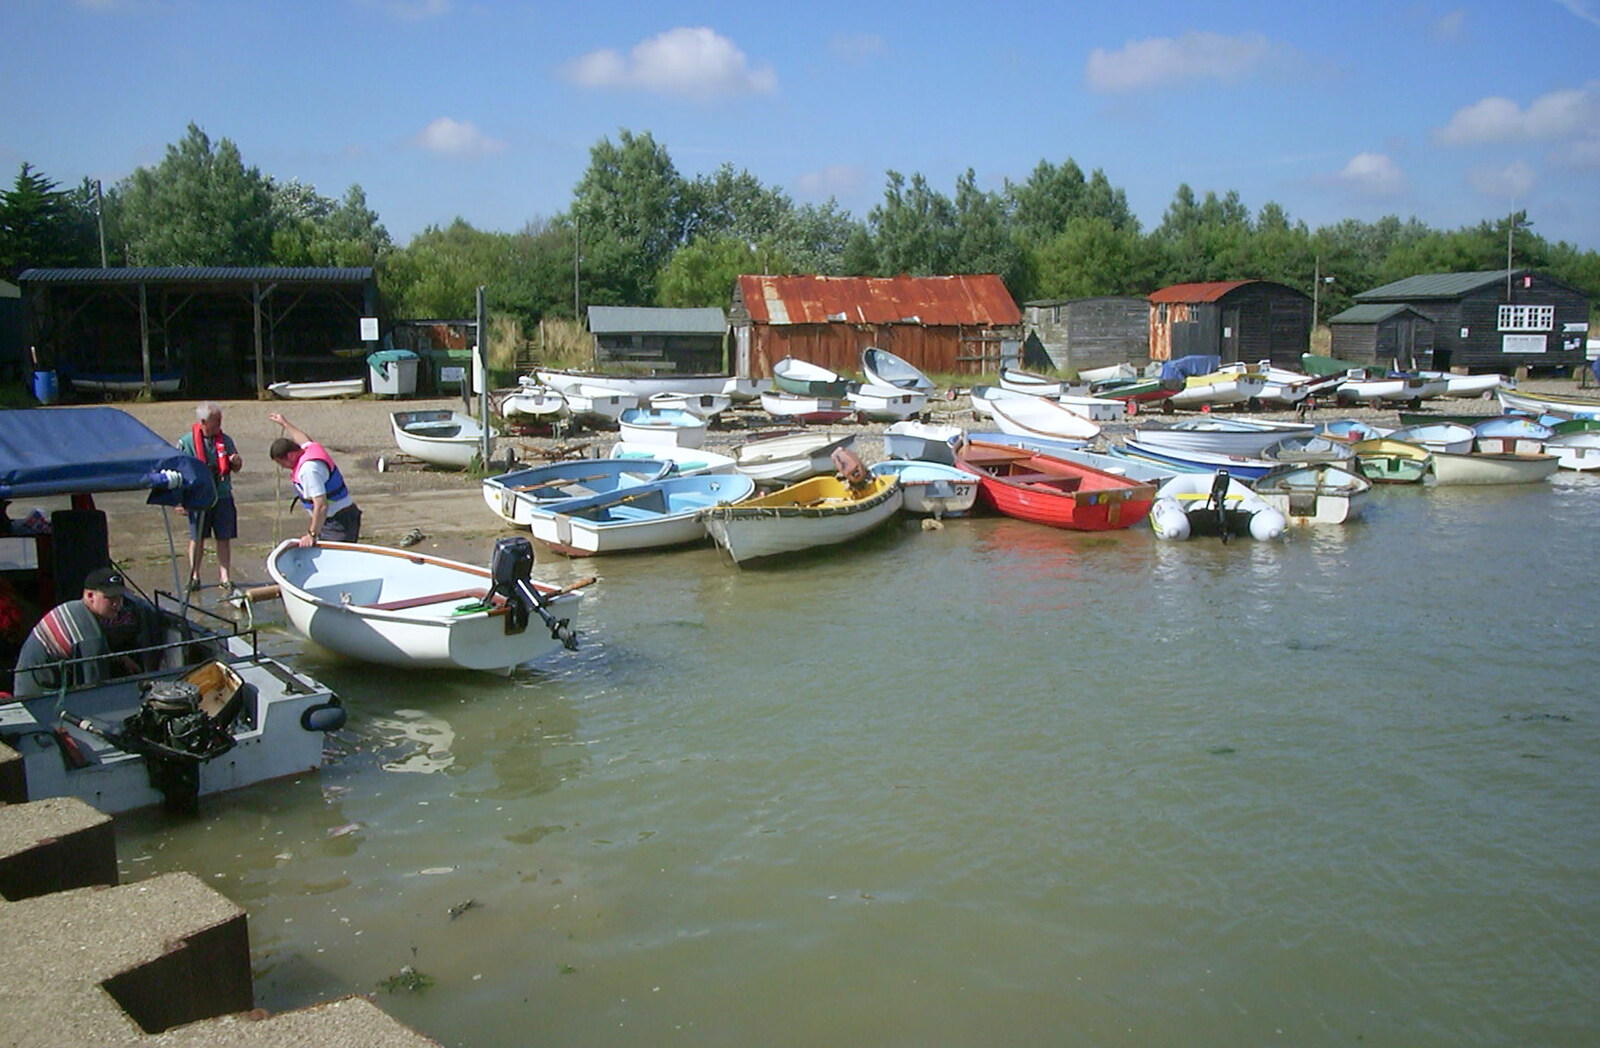 A BSCC Splinter Group Camping Weekend, Theberton, Suffolk - 11th August 2002: Boats and sheds at Orford